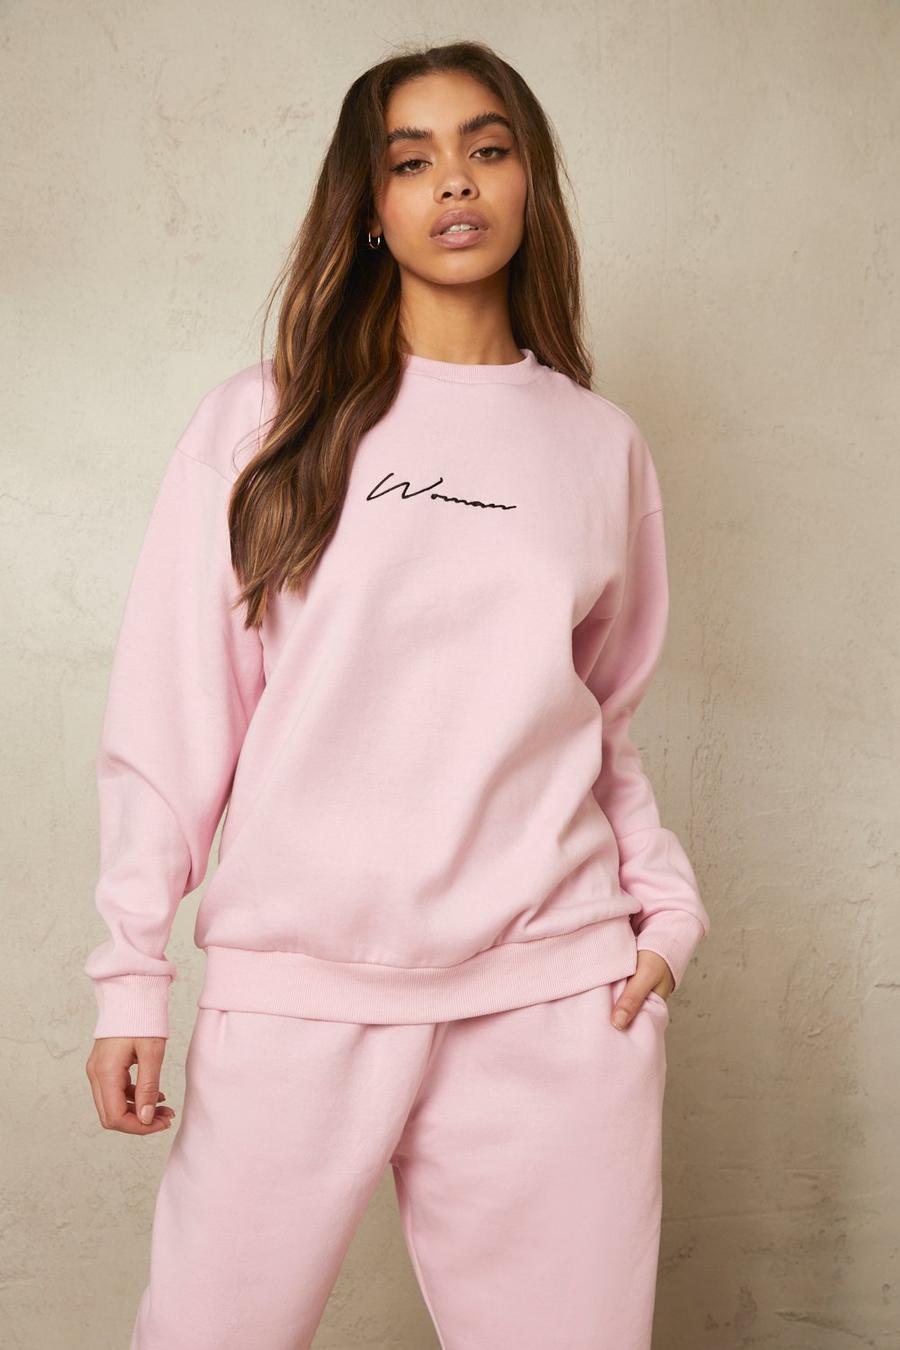 Pink L discount 94% NoName jumper WOMEN FASHION Jumpers & Sweatshirts Casual 